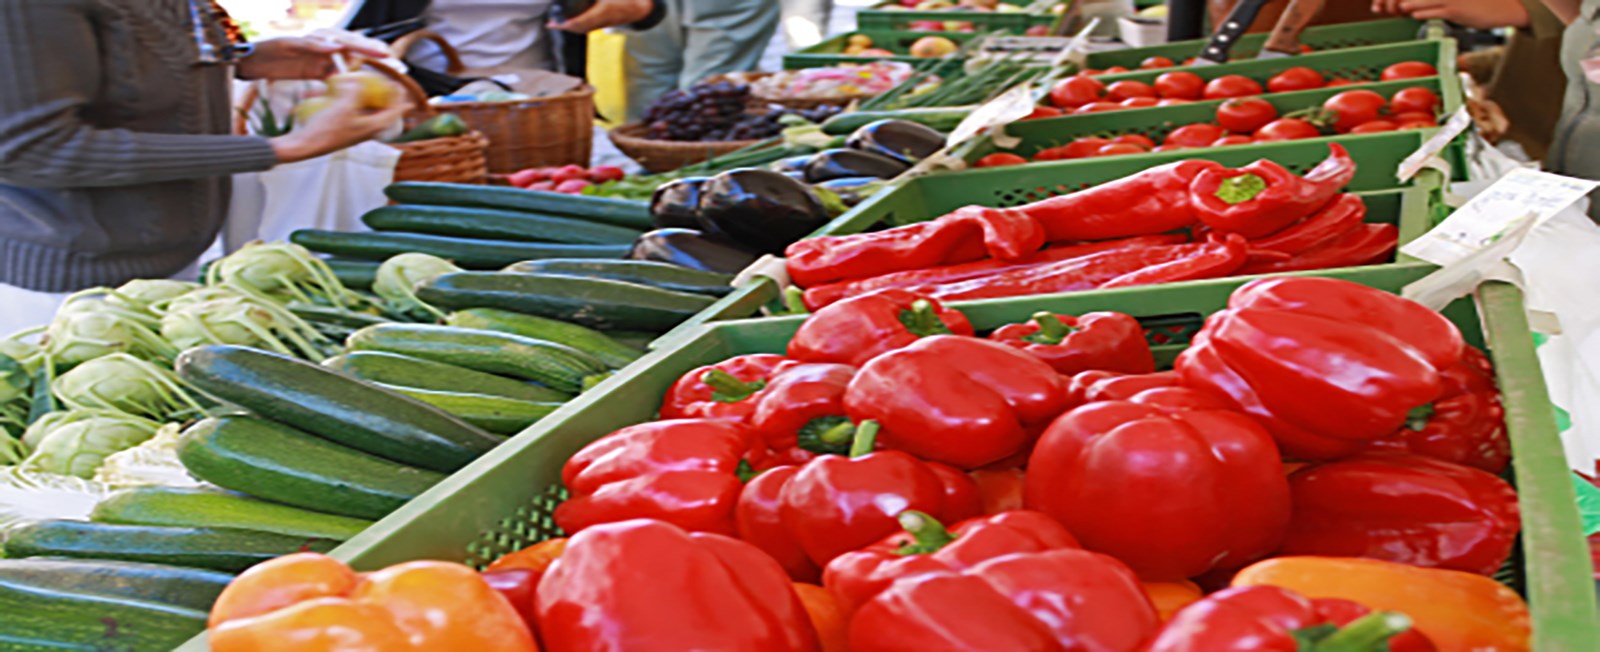 Farmers' Markets, Pick Your Own Produce, and More!